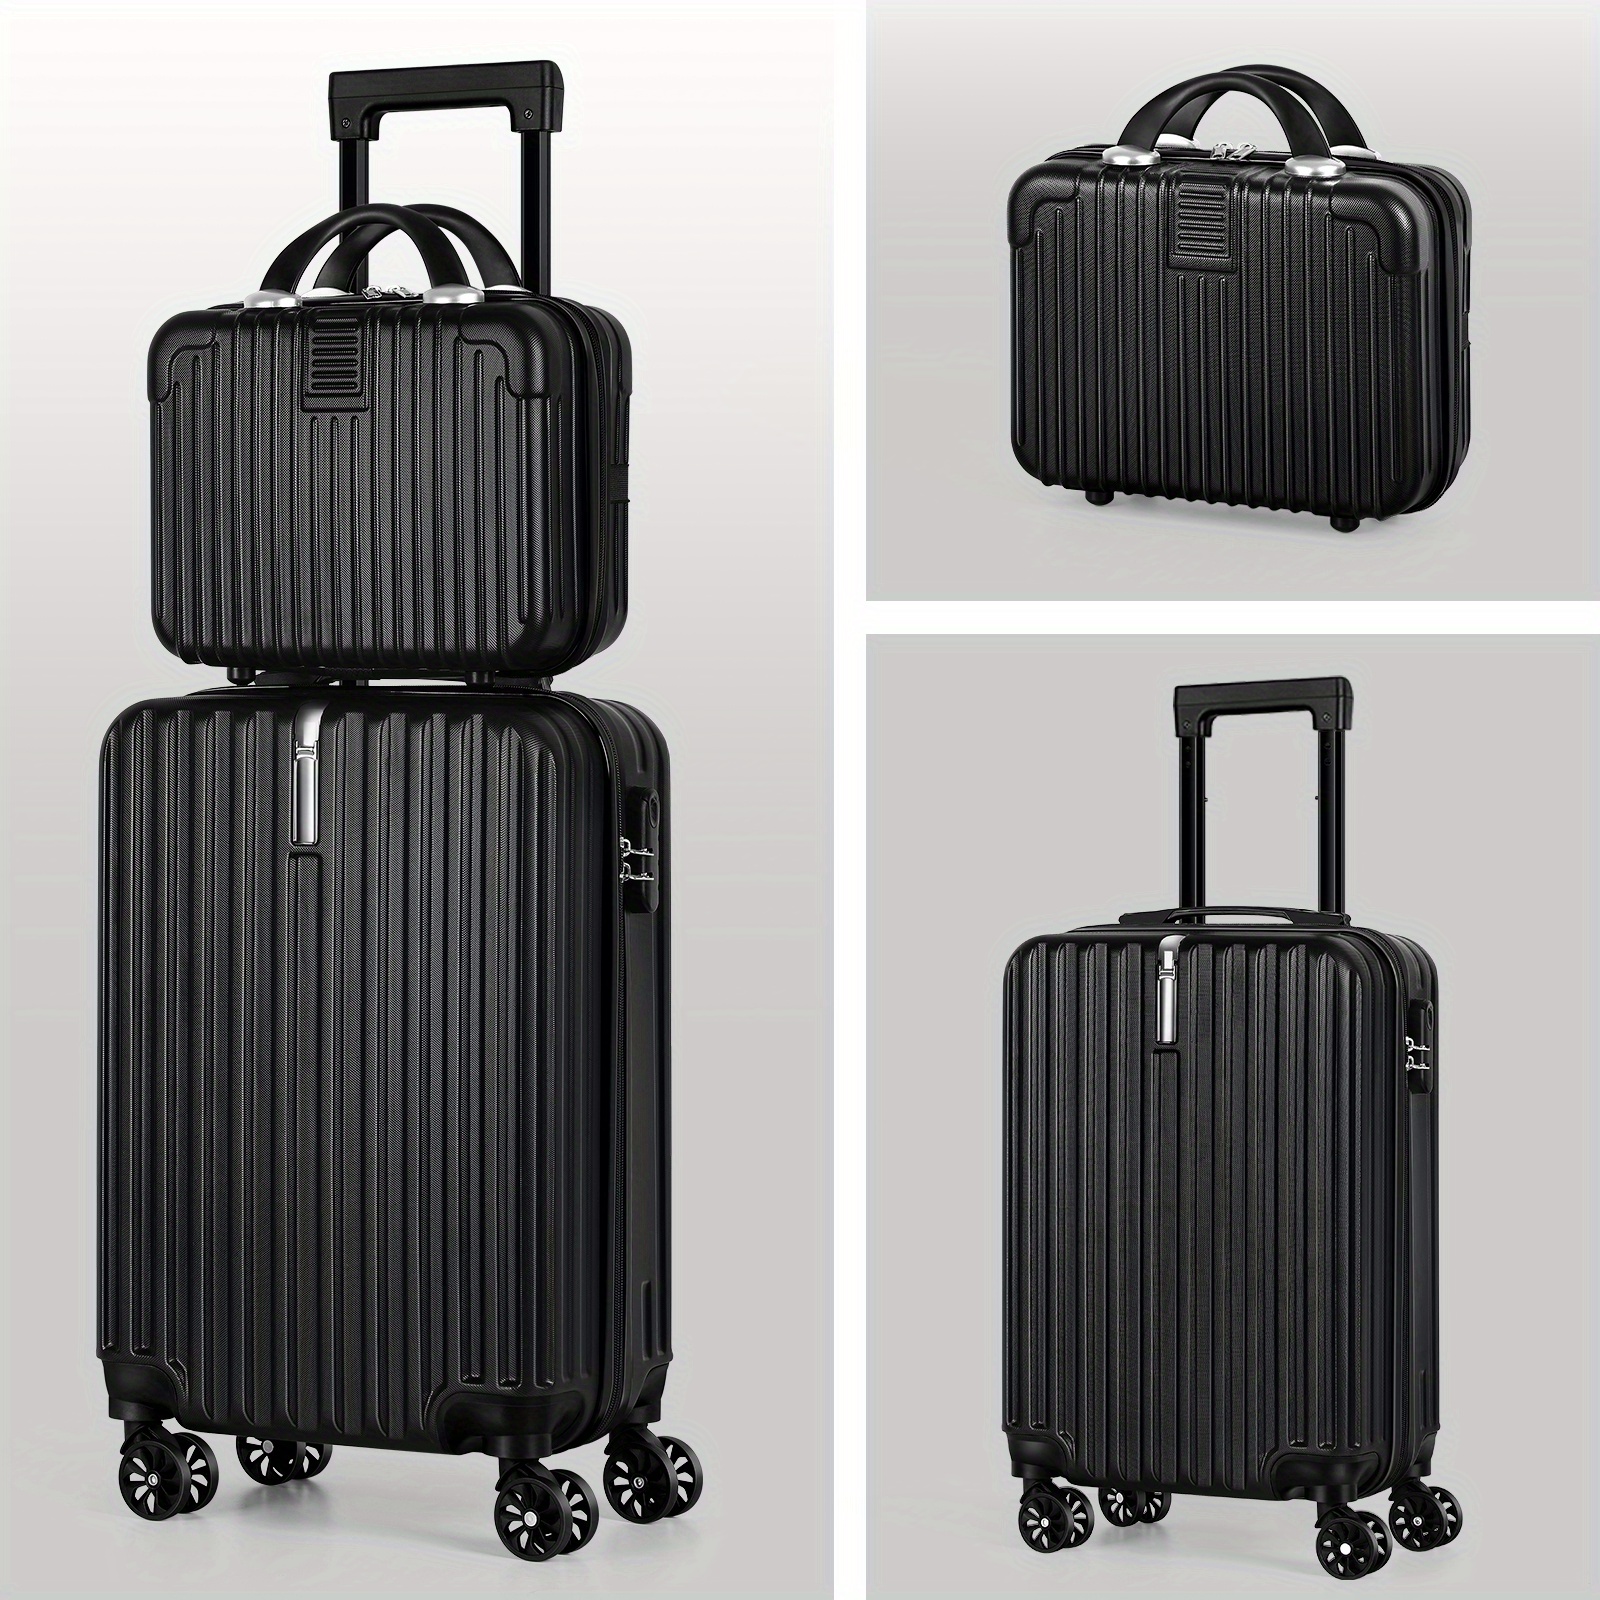 

Simple Carry On Luggage 20 Inch Suitcase Set 2 Piece With 14" Cosmetic Case, Hardside Carry On Suitcase Case Set